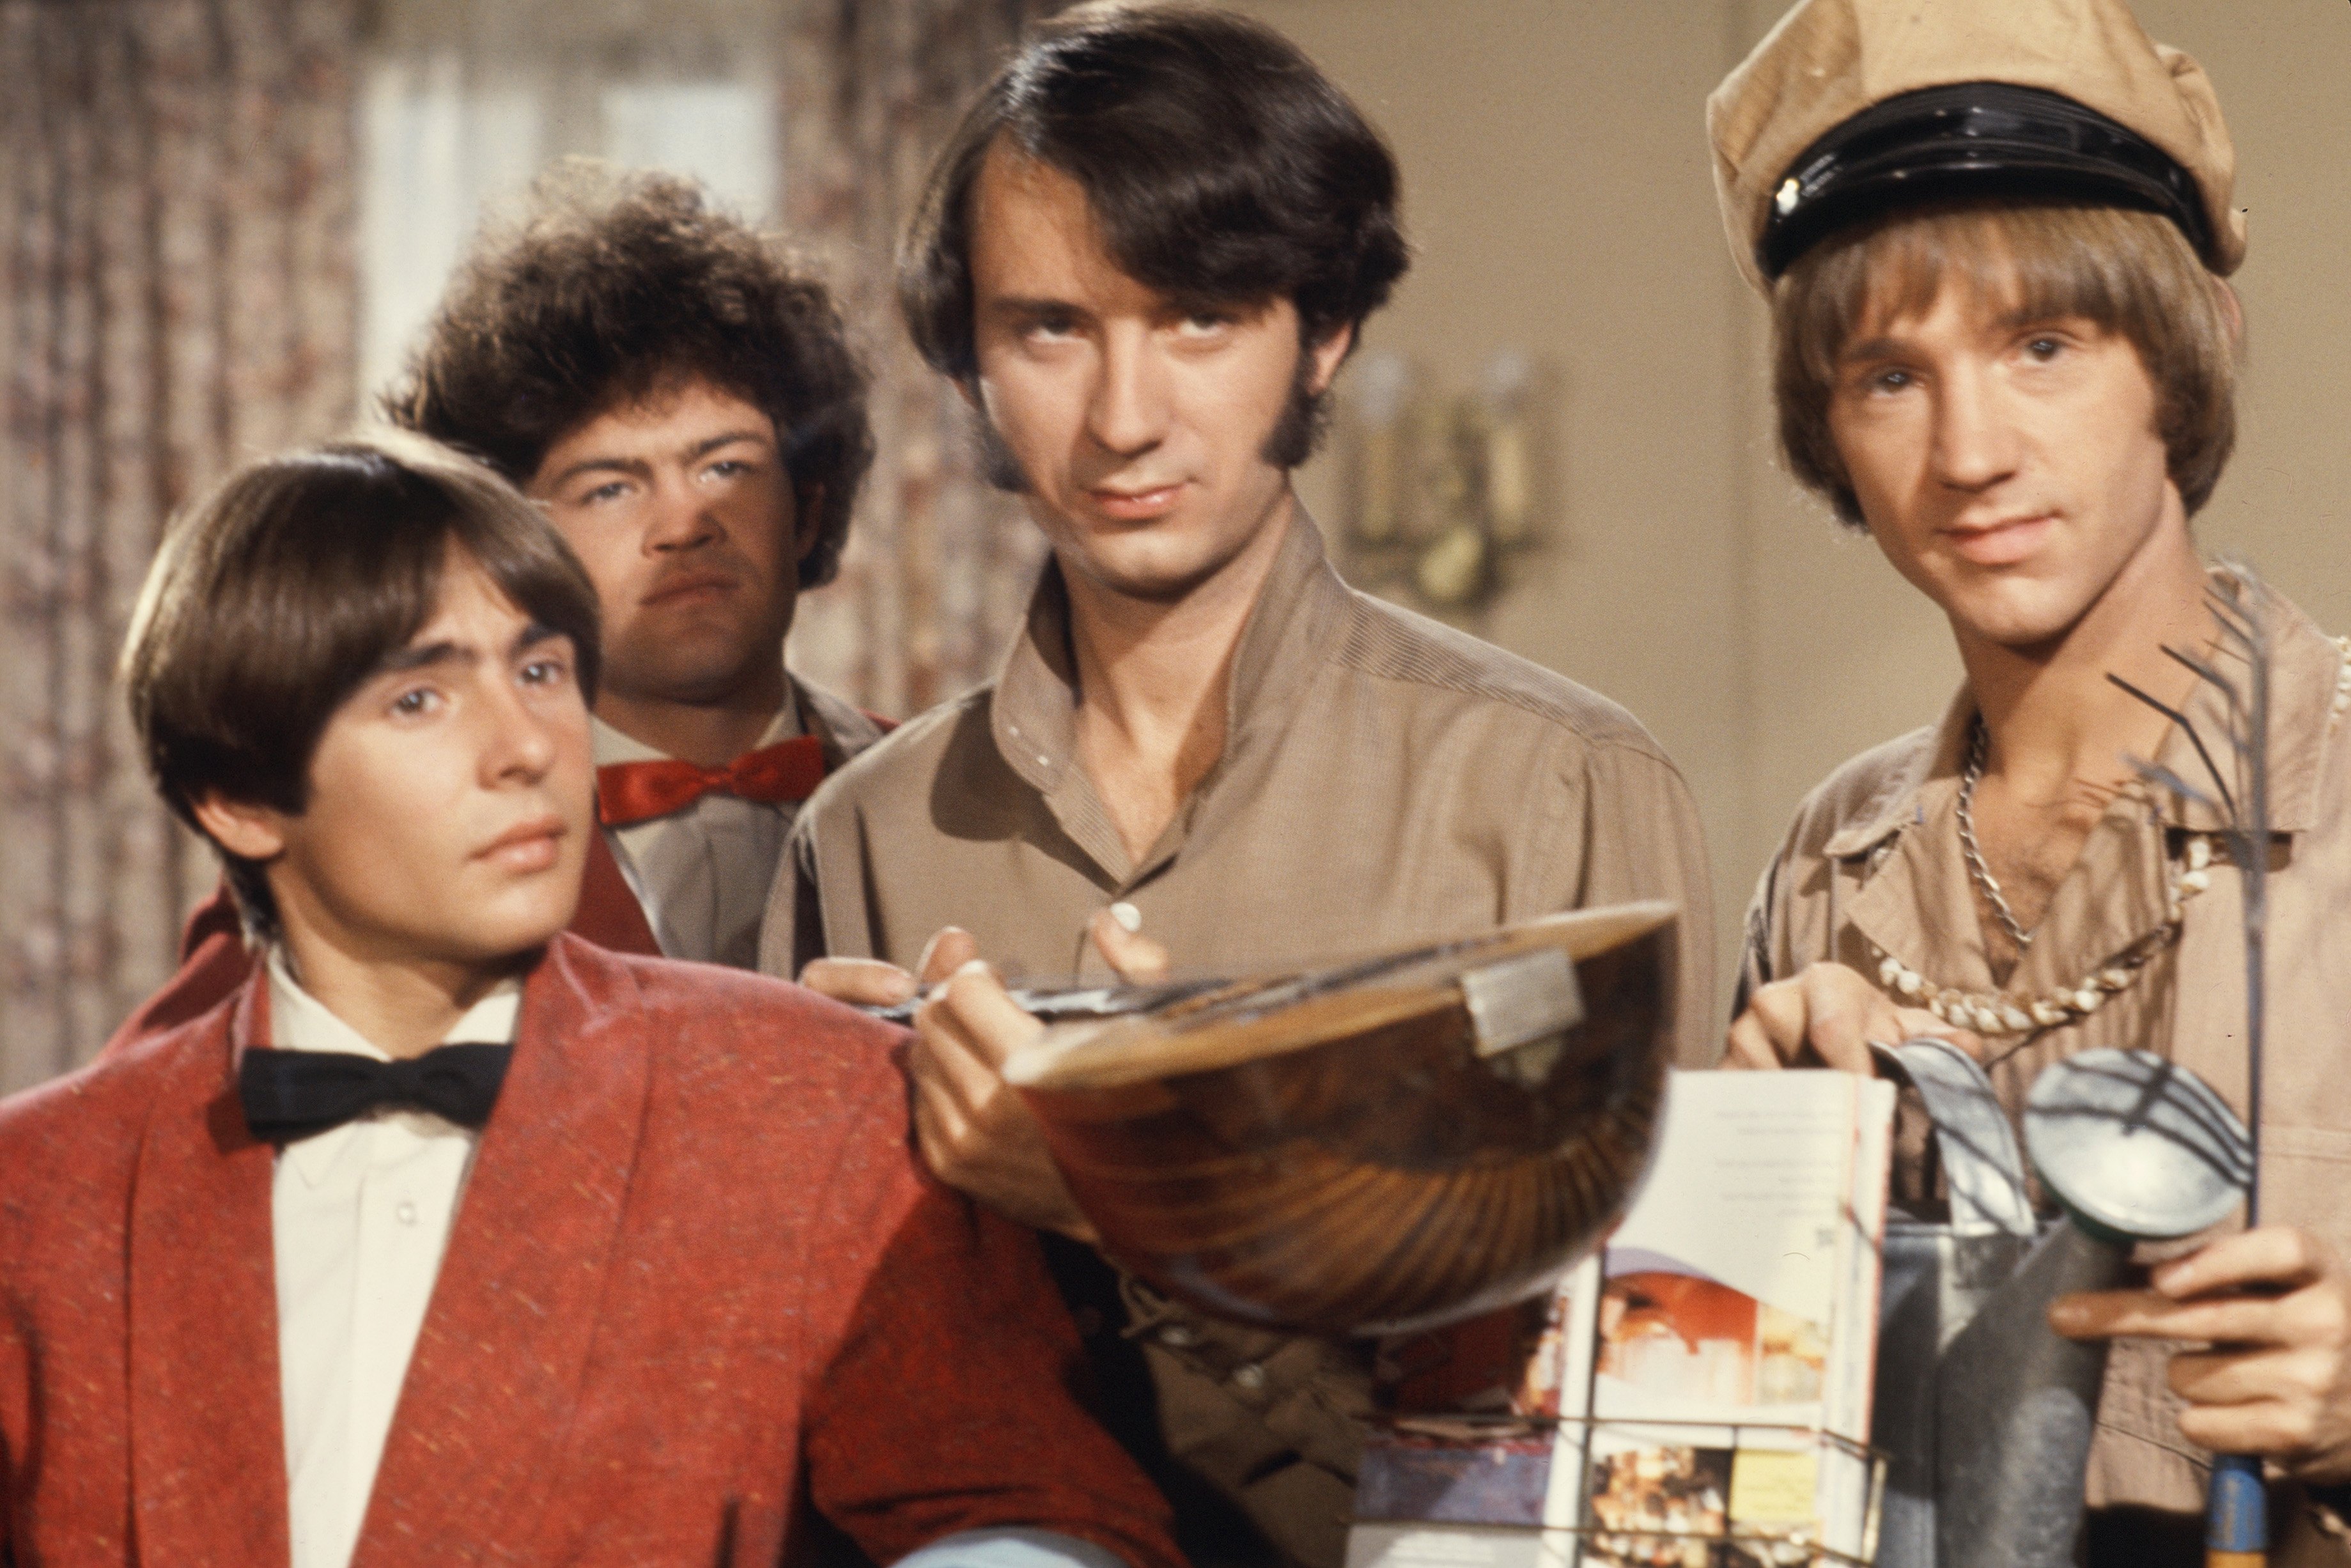 The Monkees' Davy Jones, Micky Dolenz, Mike Nesmith, and Peter Tork standing